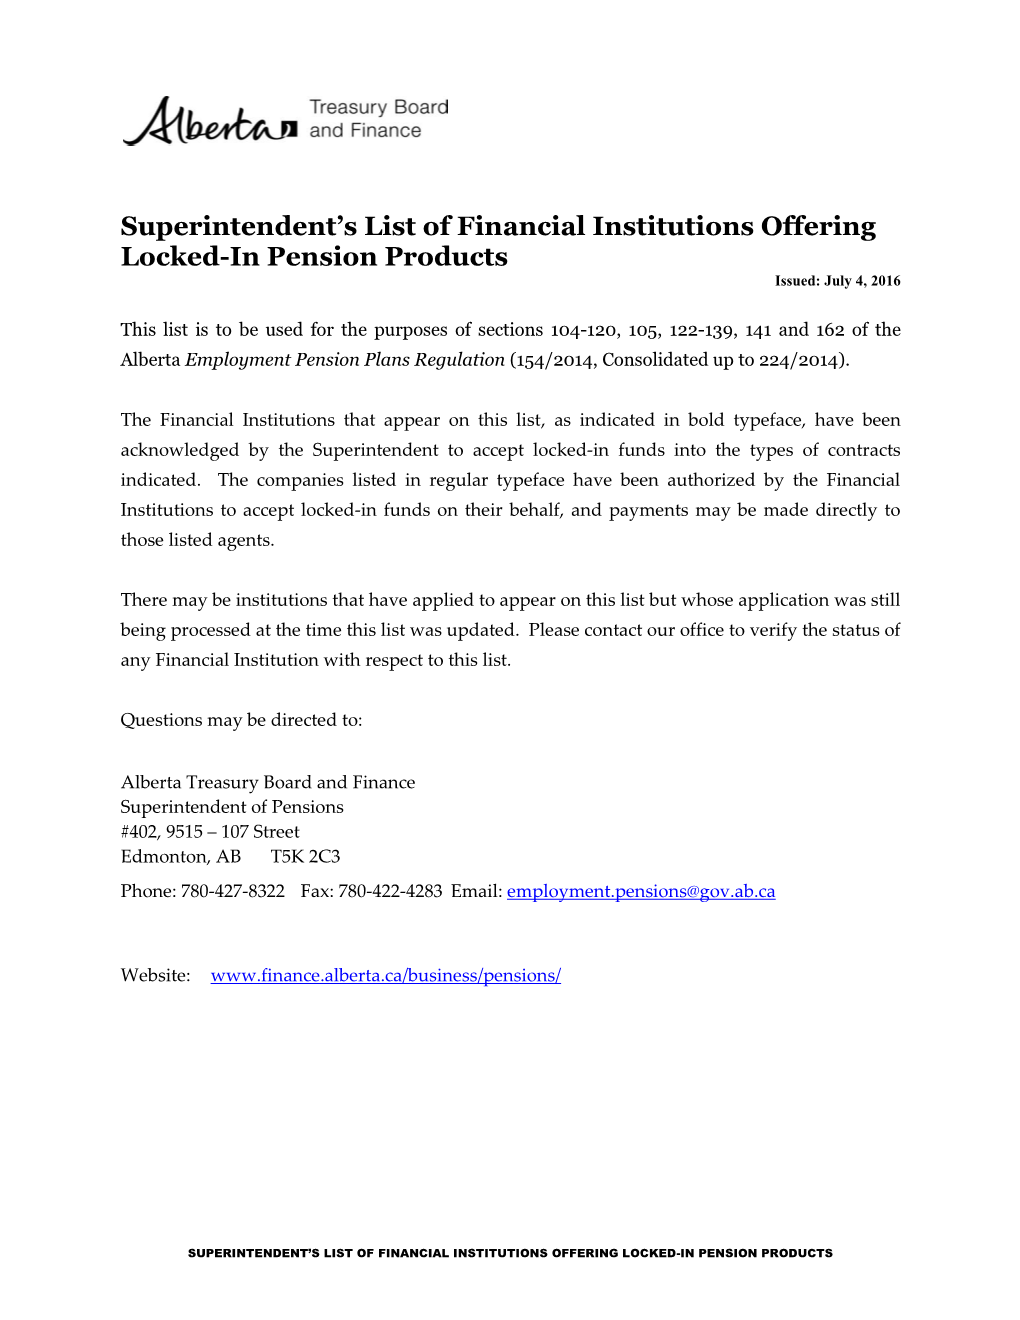 List of Financial Institutions Offering Locked-In Pension Products Issued: July 4, 2016